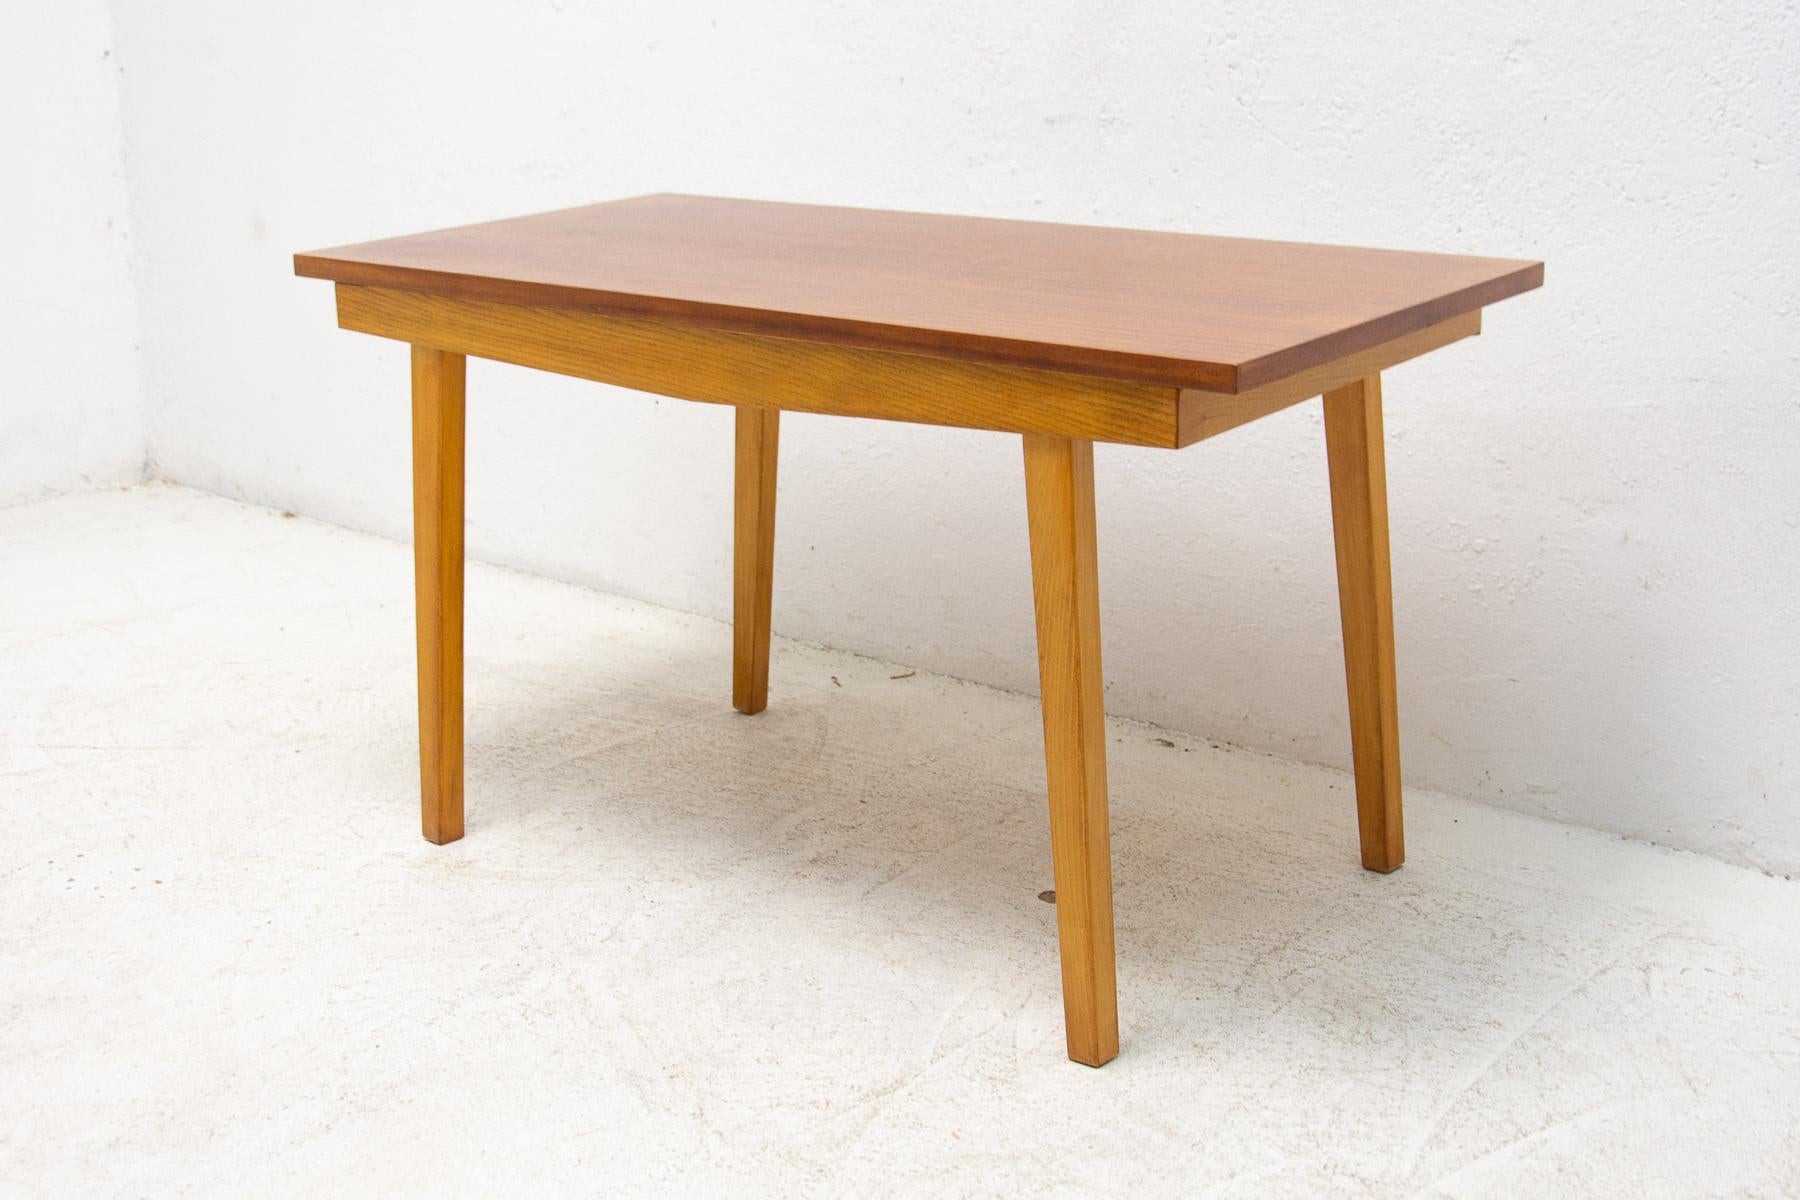 Mid-century low central table, made in the former Czechoslovakia in the 1960's.

It's made of beech wood and mahogany. In very good Vintage condition, showing signs of age and using.

Height: 56 cm

length: 100 cm

width: 49 cm.